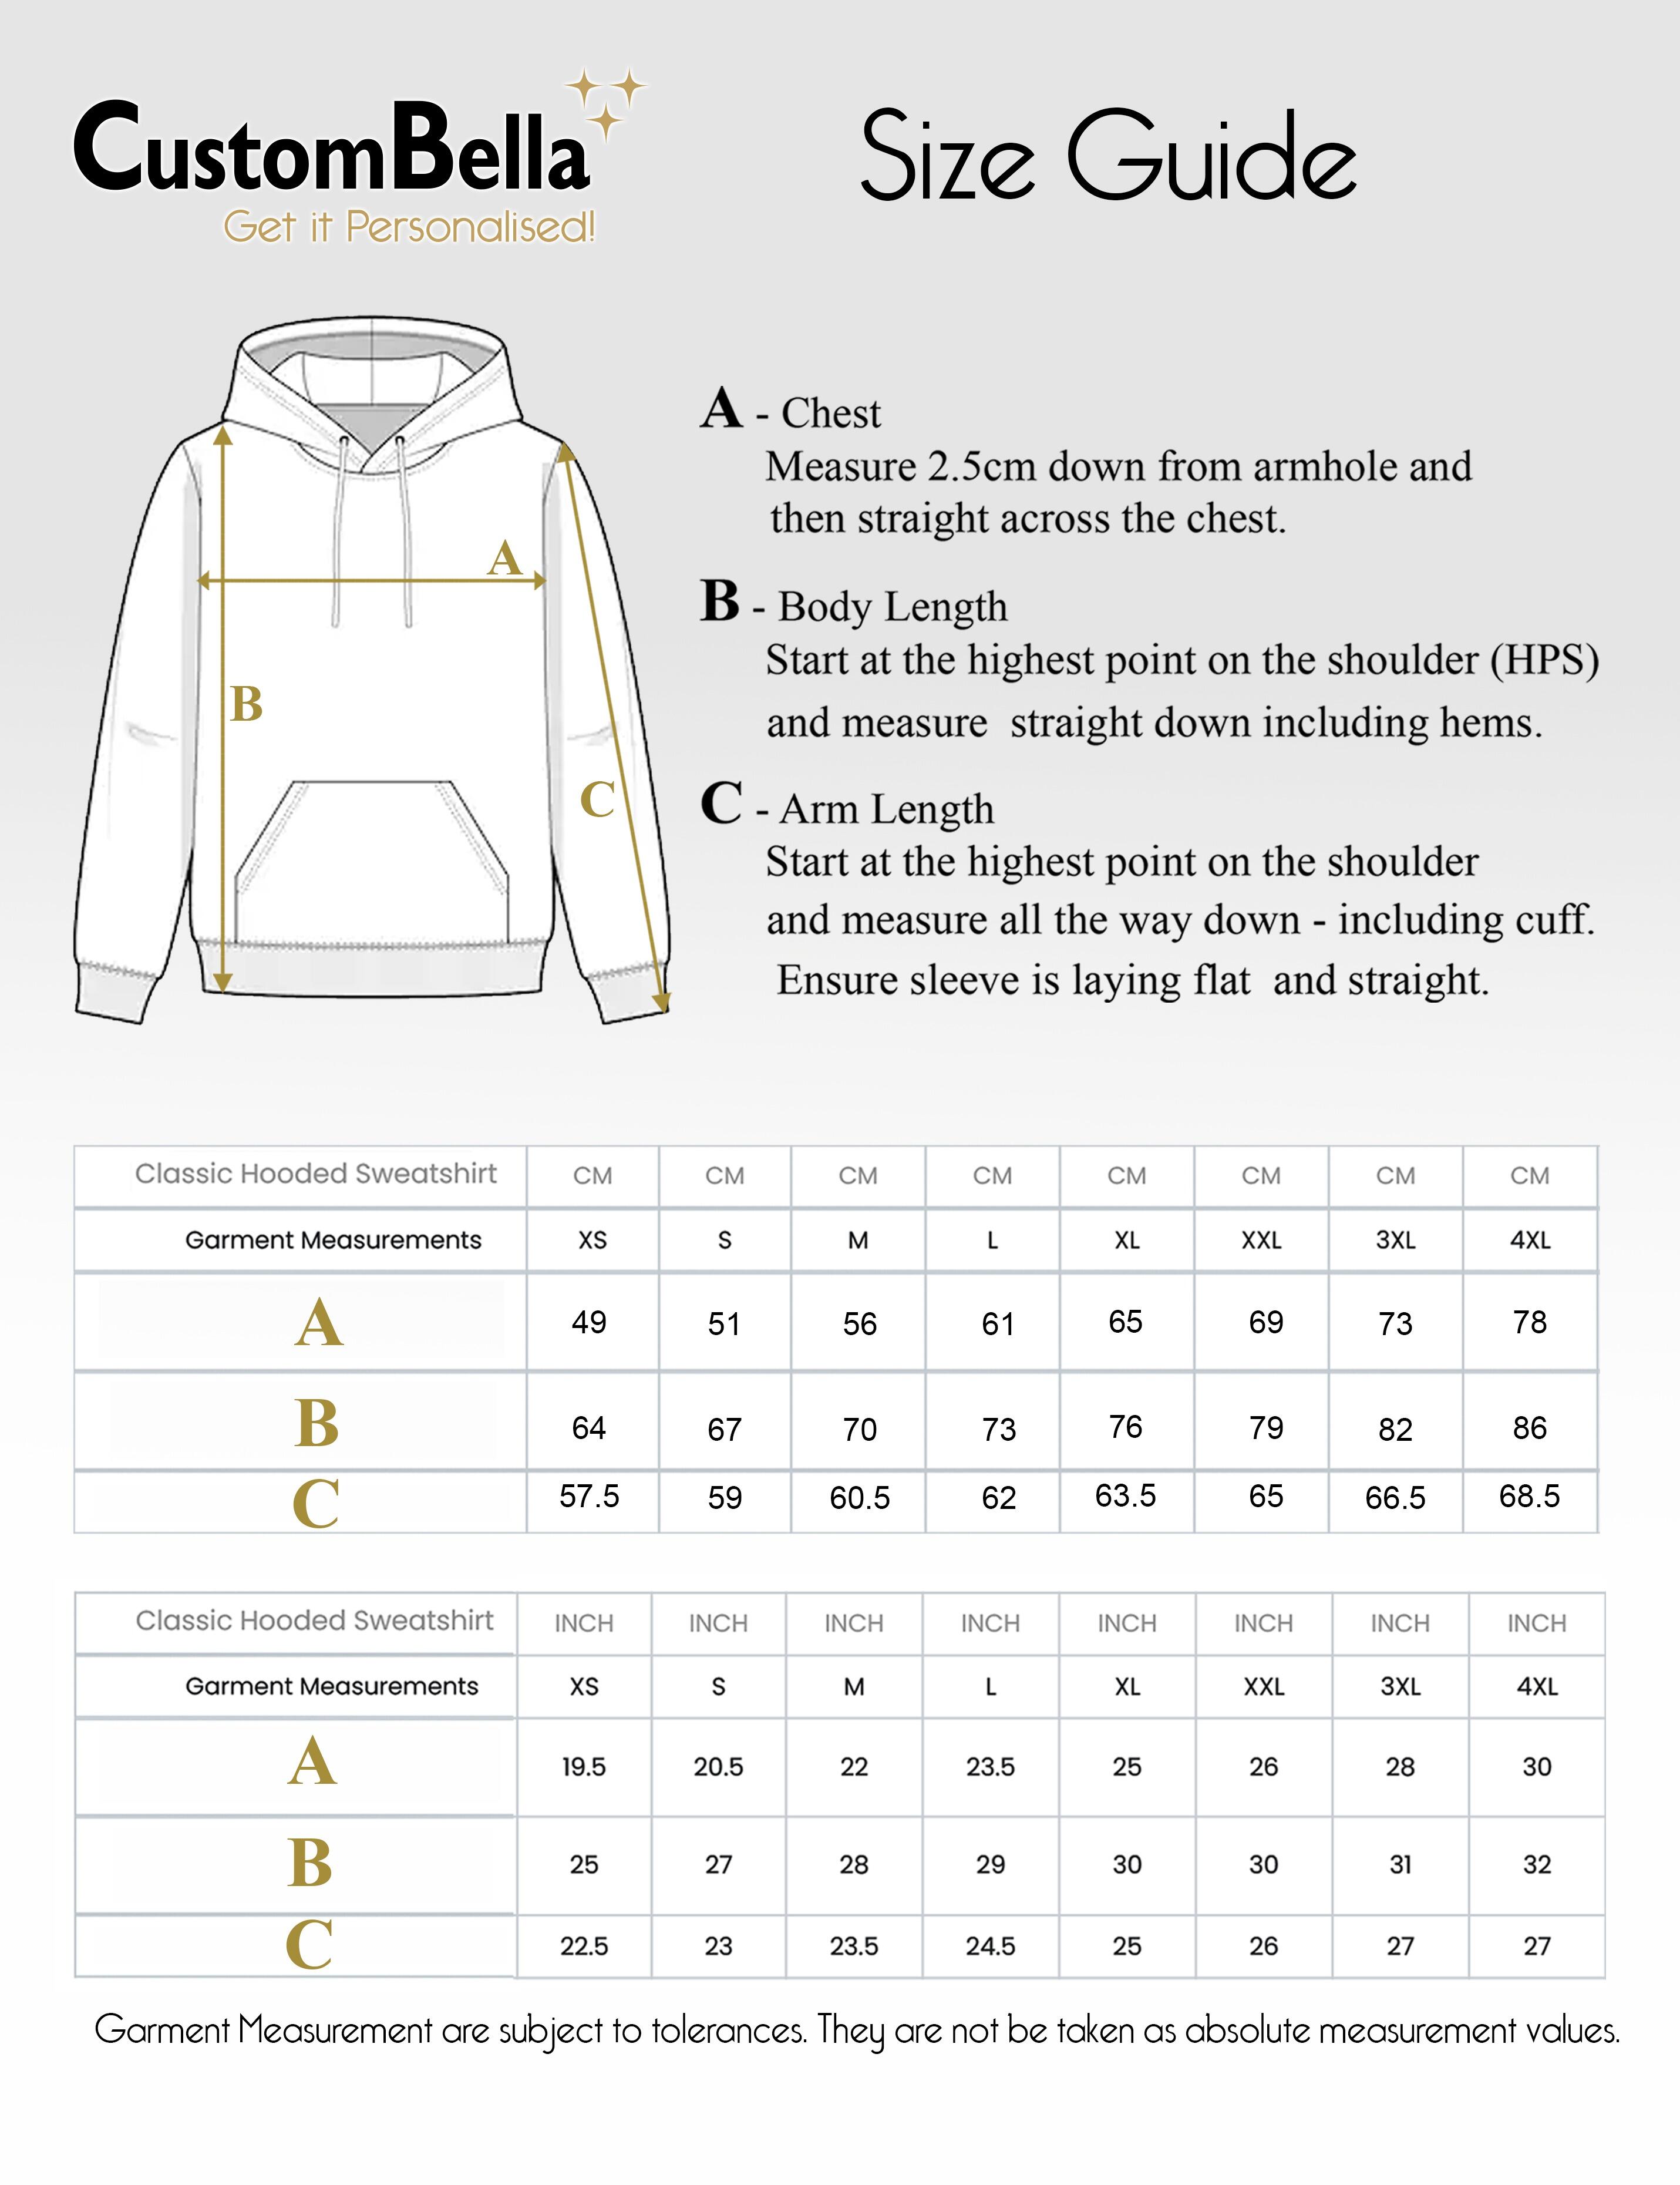 Full colour printed Hoodie size chart